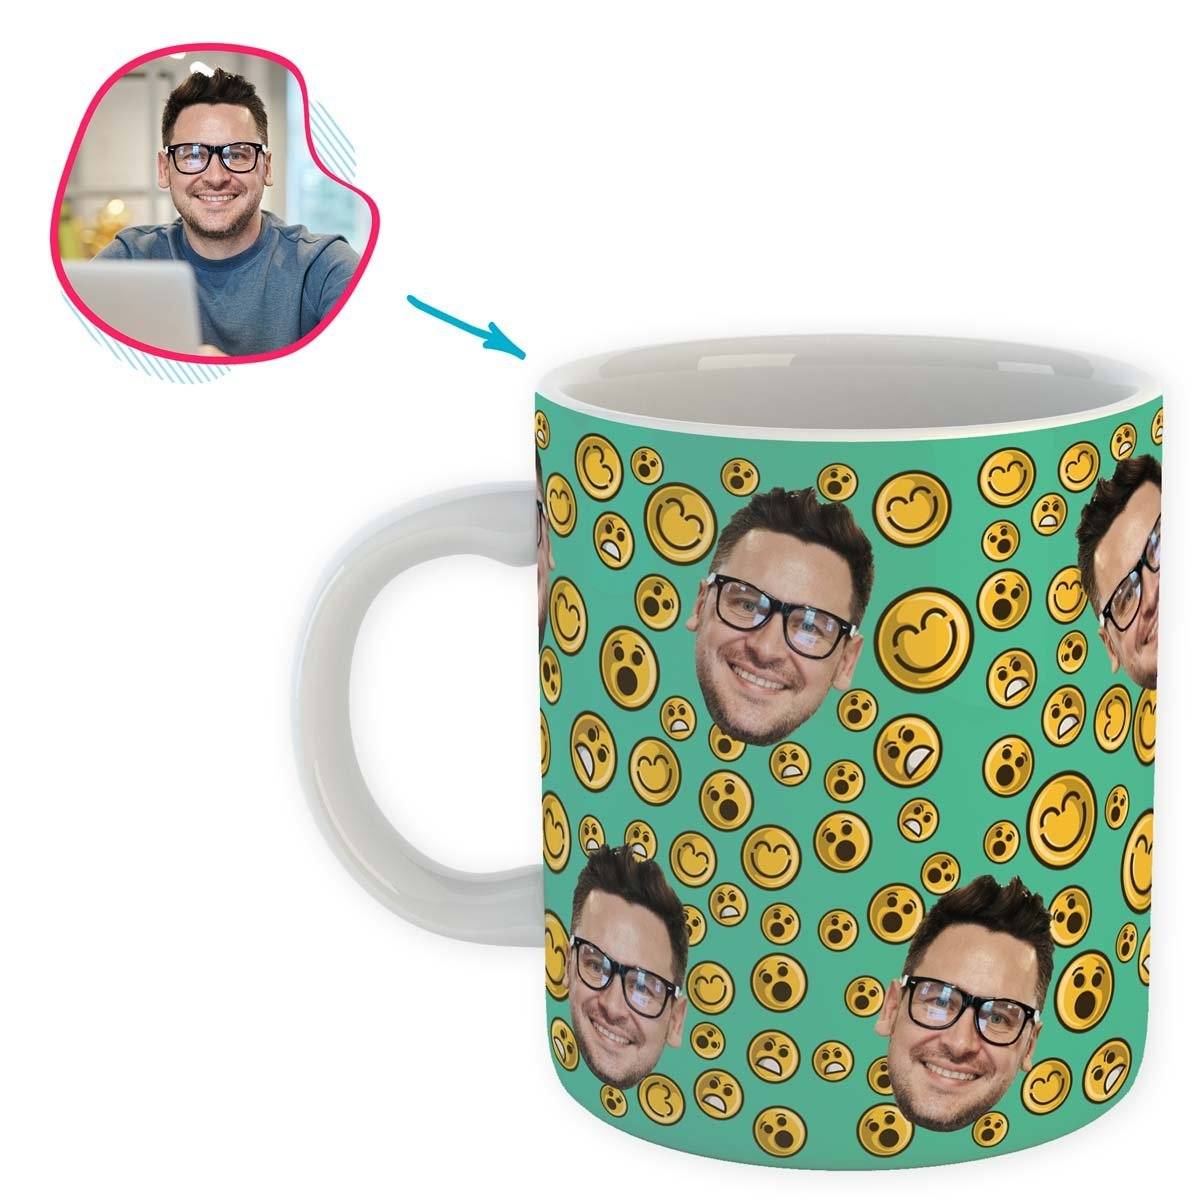 mint Smiles mug personalized with photo of face printed on it